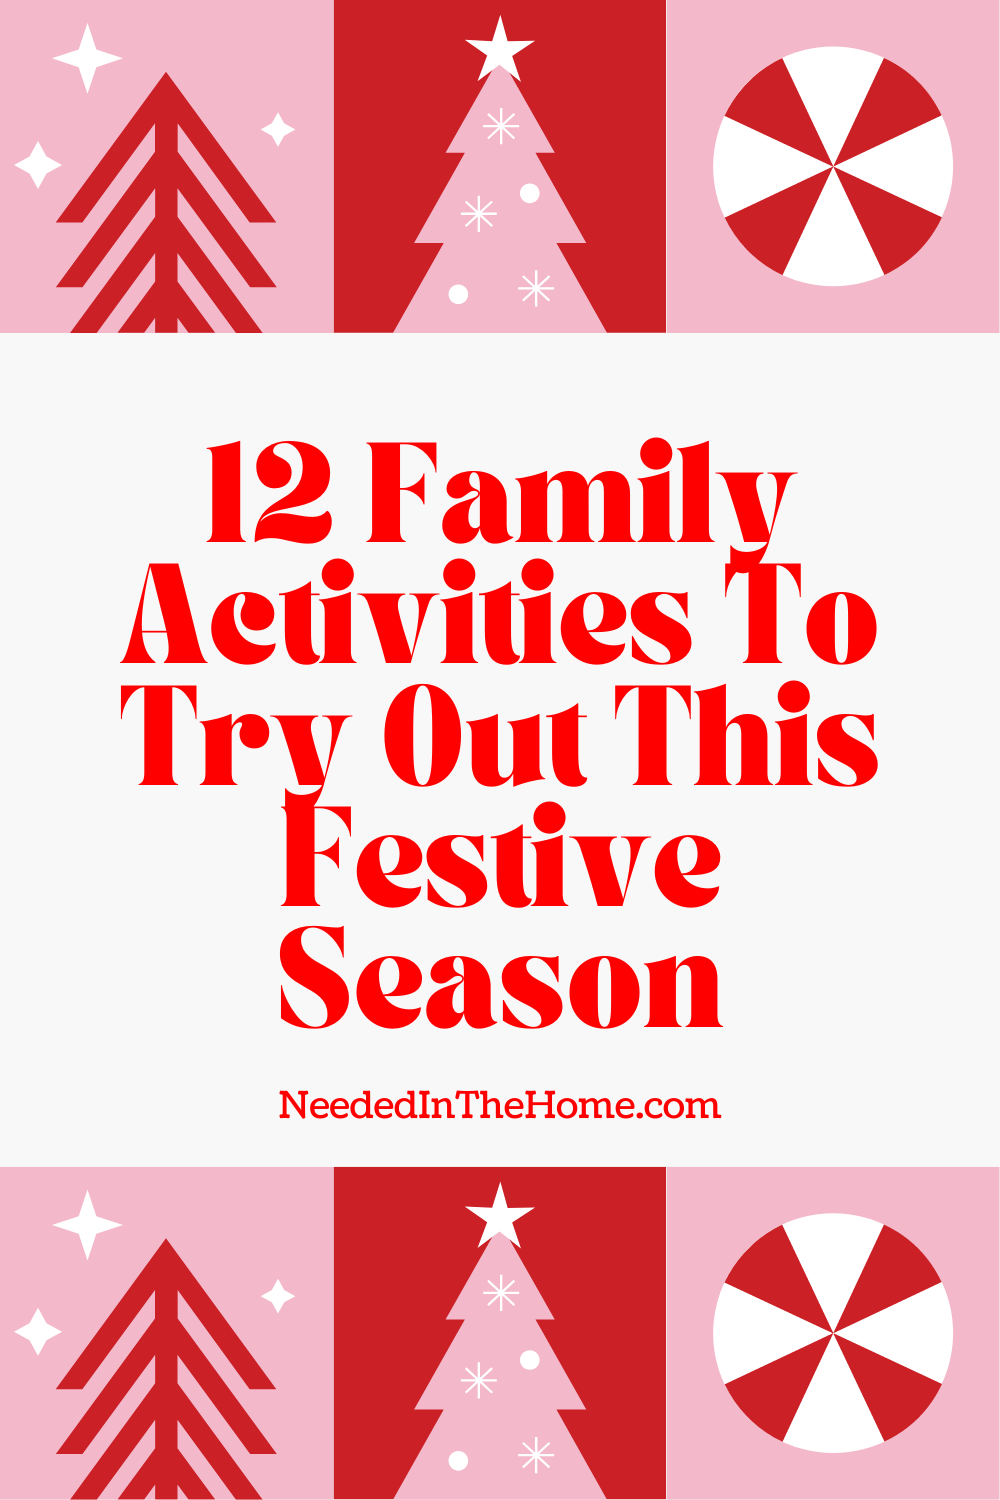 pinterest pin description 12 family activities to try out this festive season trees candy neededinthehome